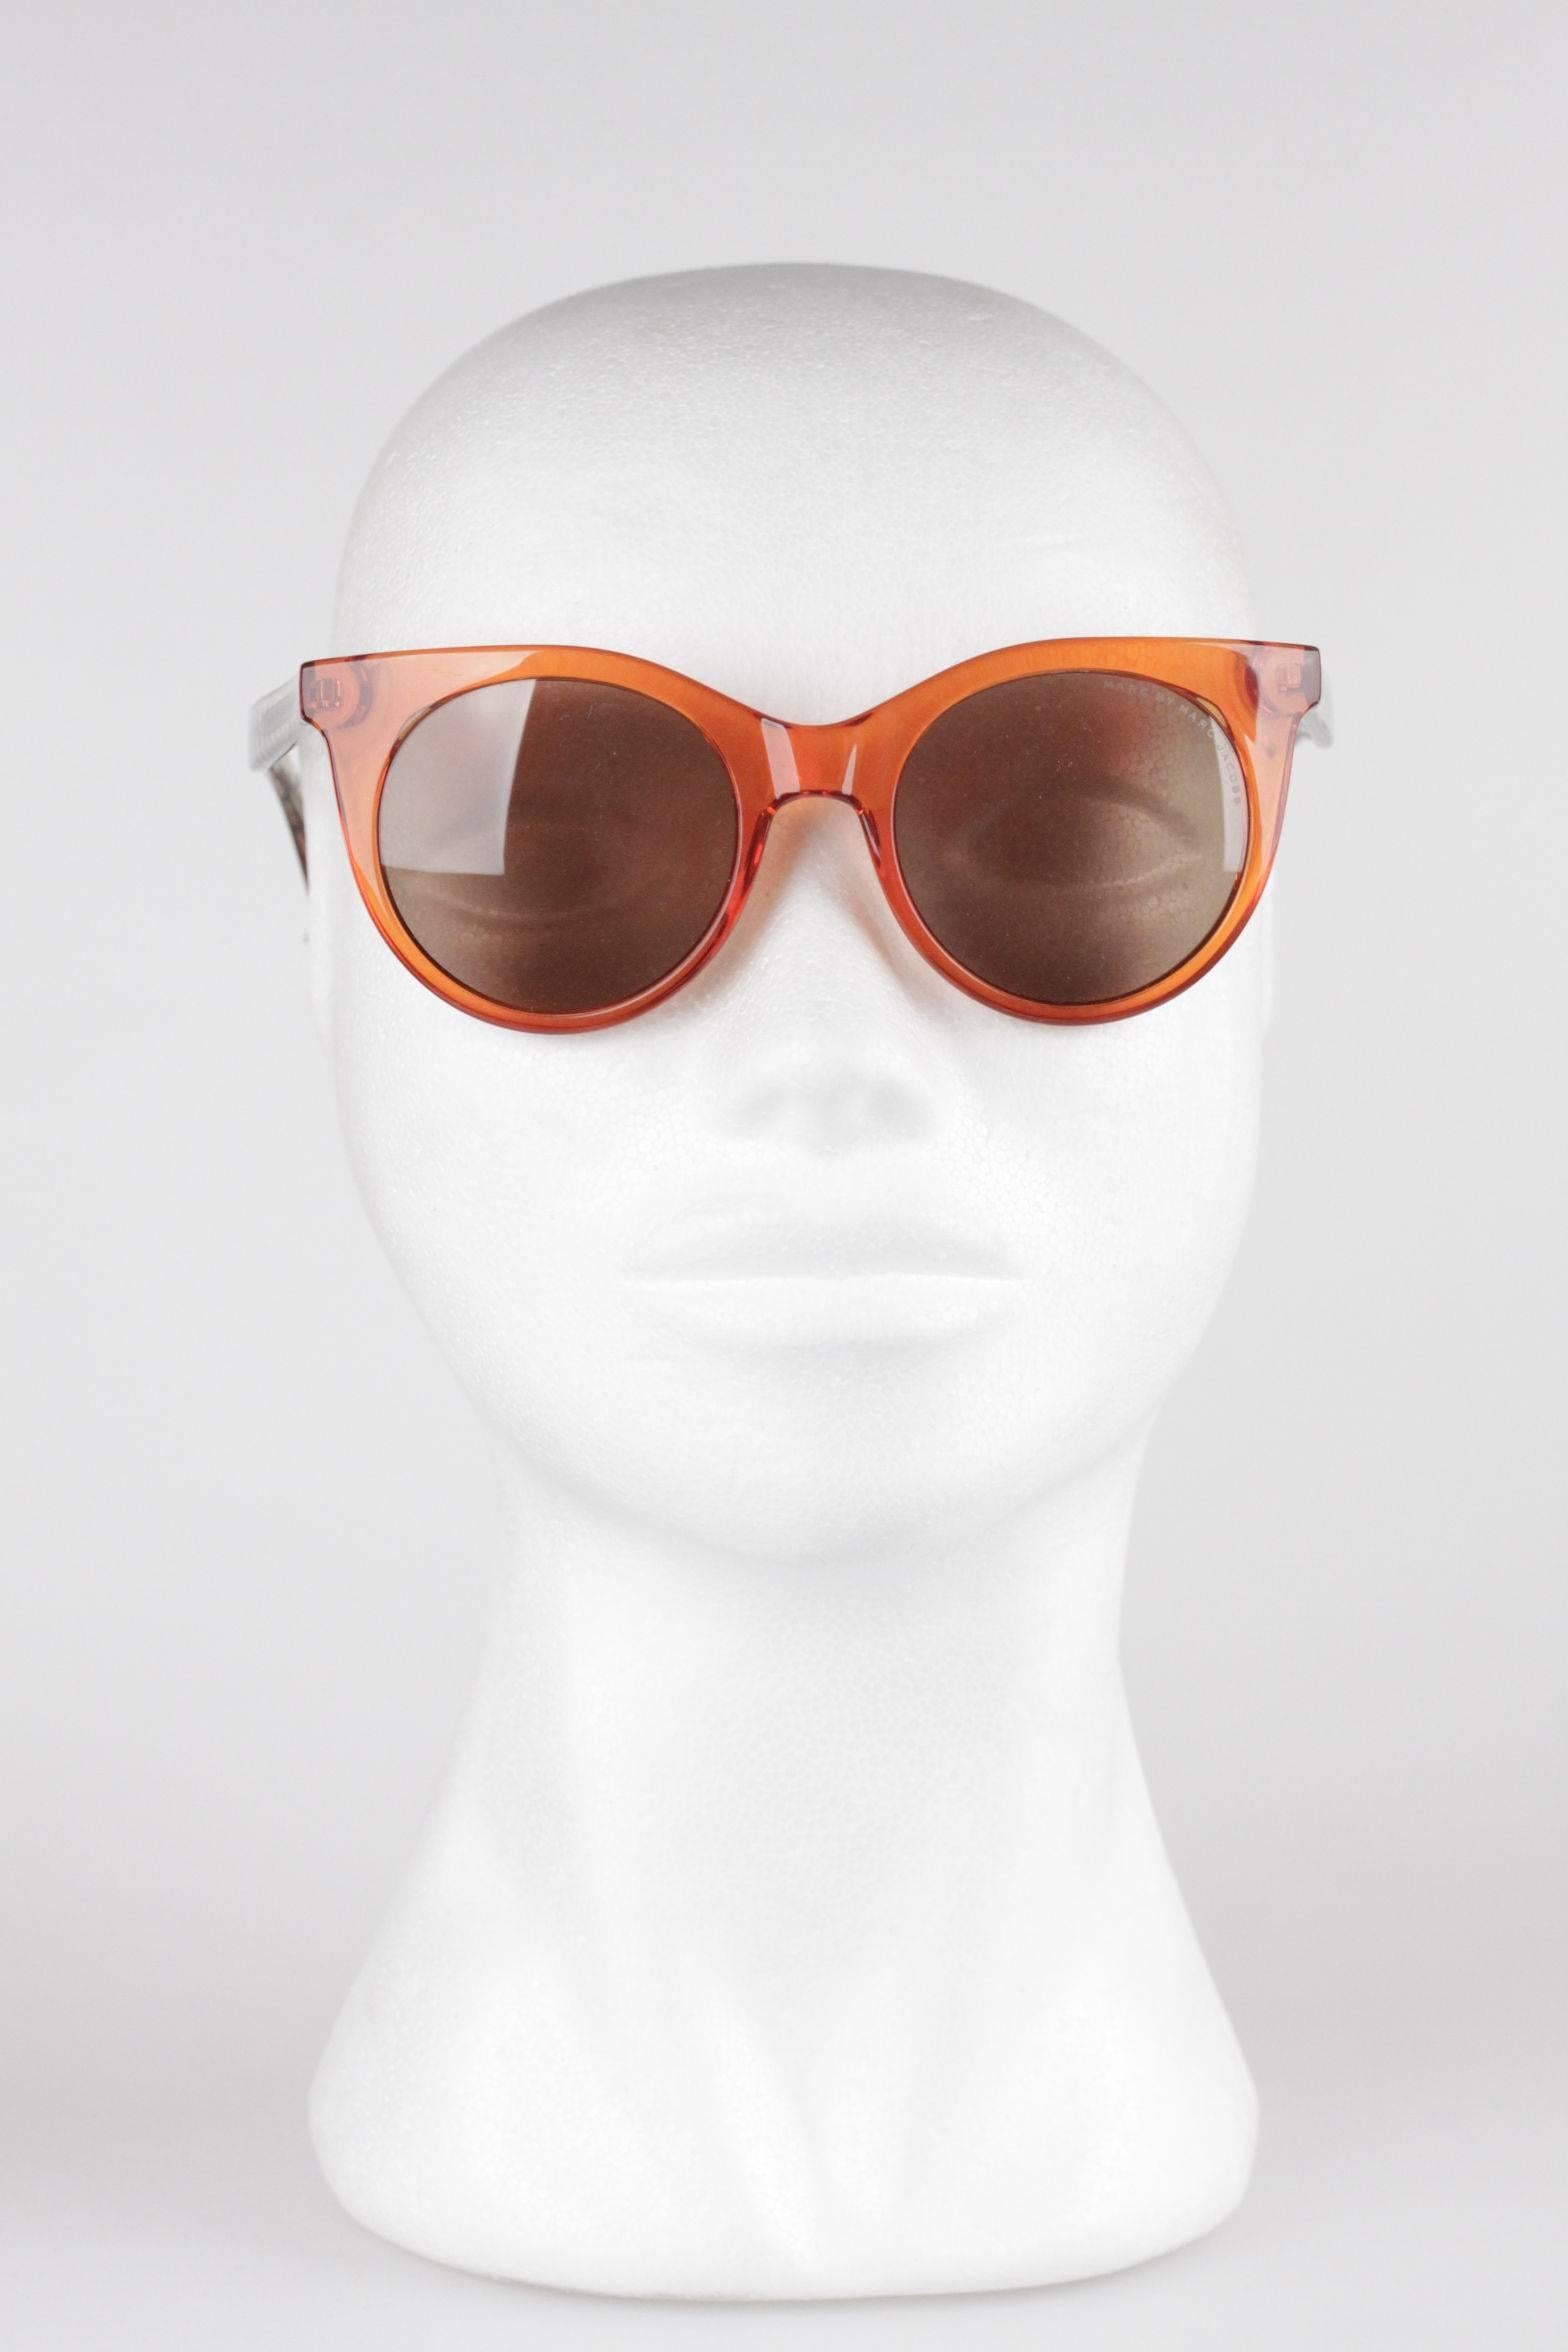 MARC by MARC JACOBS Eyewear MMJ 412/S 6HM UT Orange SUNGLASSES w/ CASE In New Condition In Rome, Rome